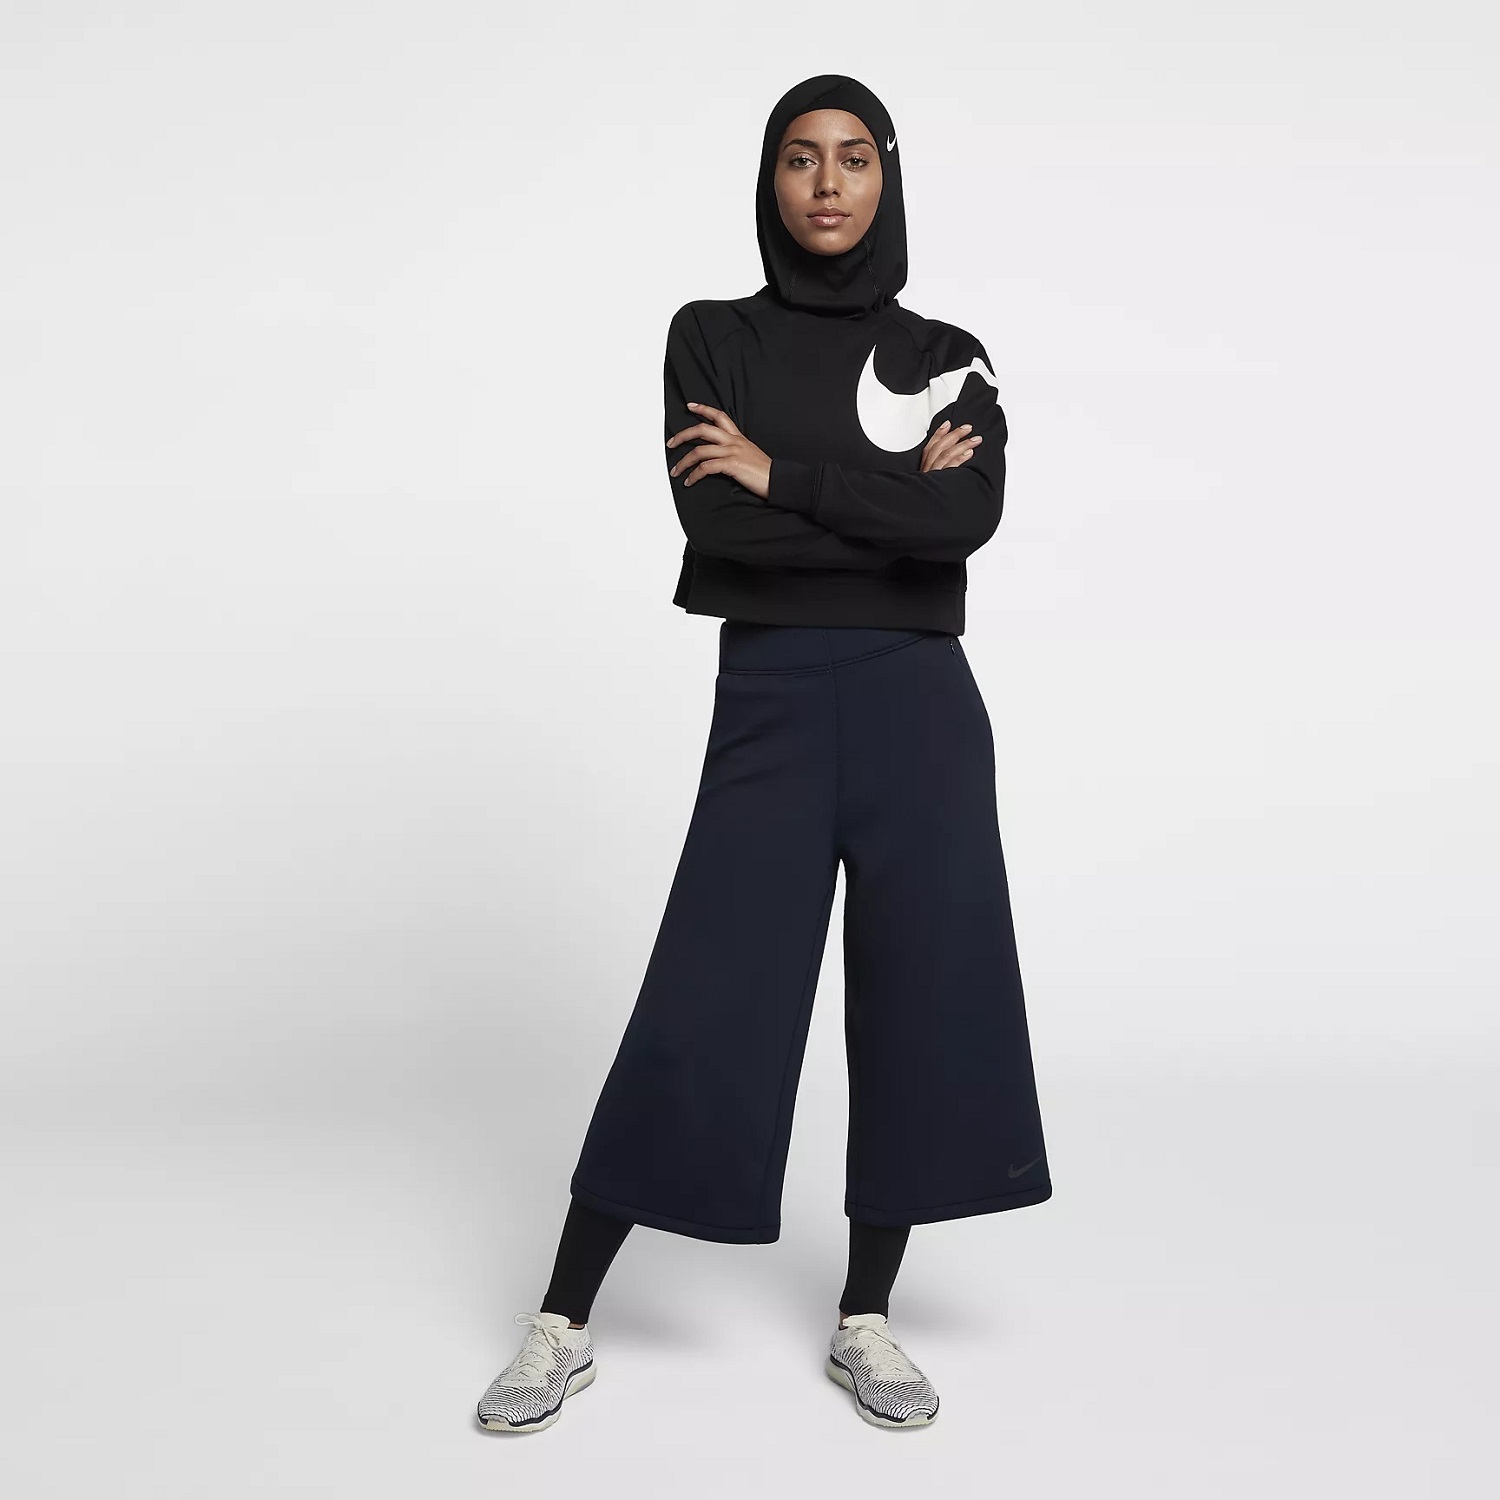 Nike Pro Hijab  Now Available For Pre Order